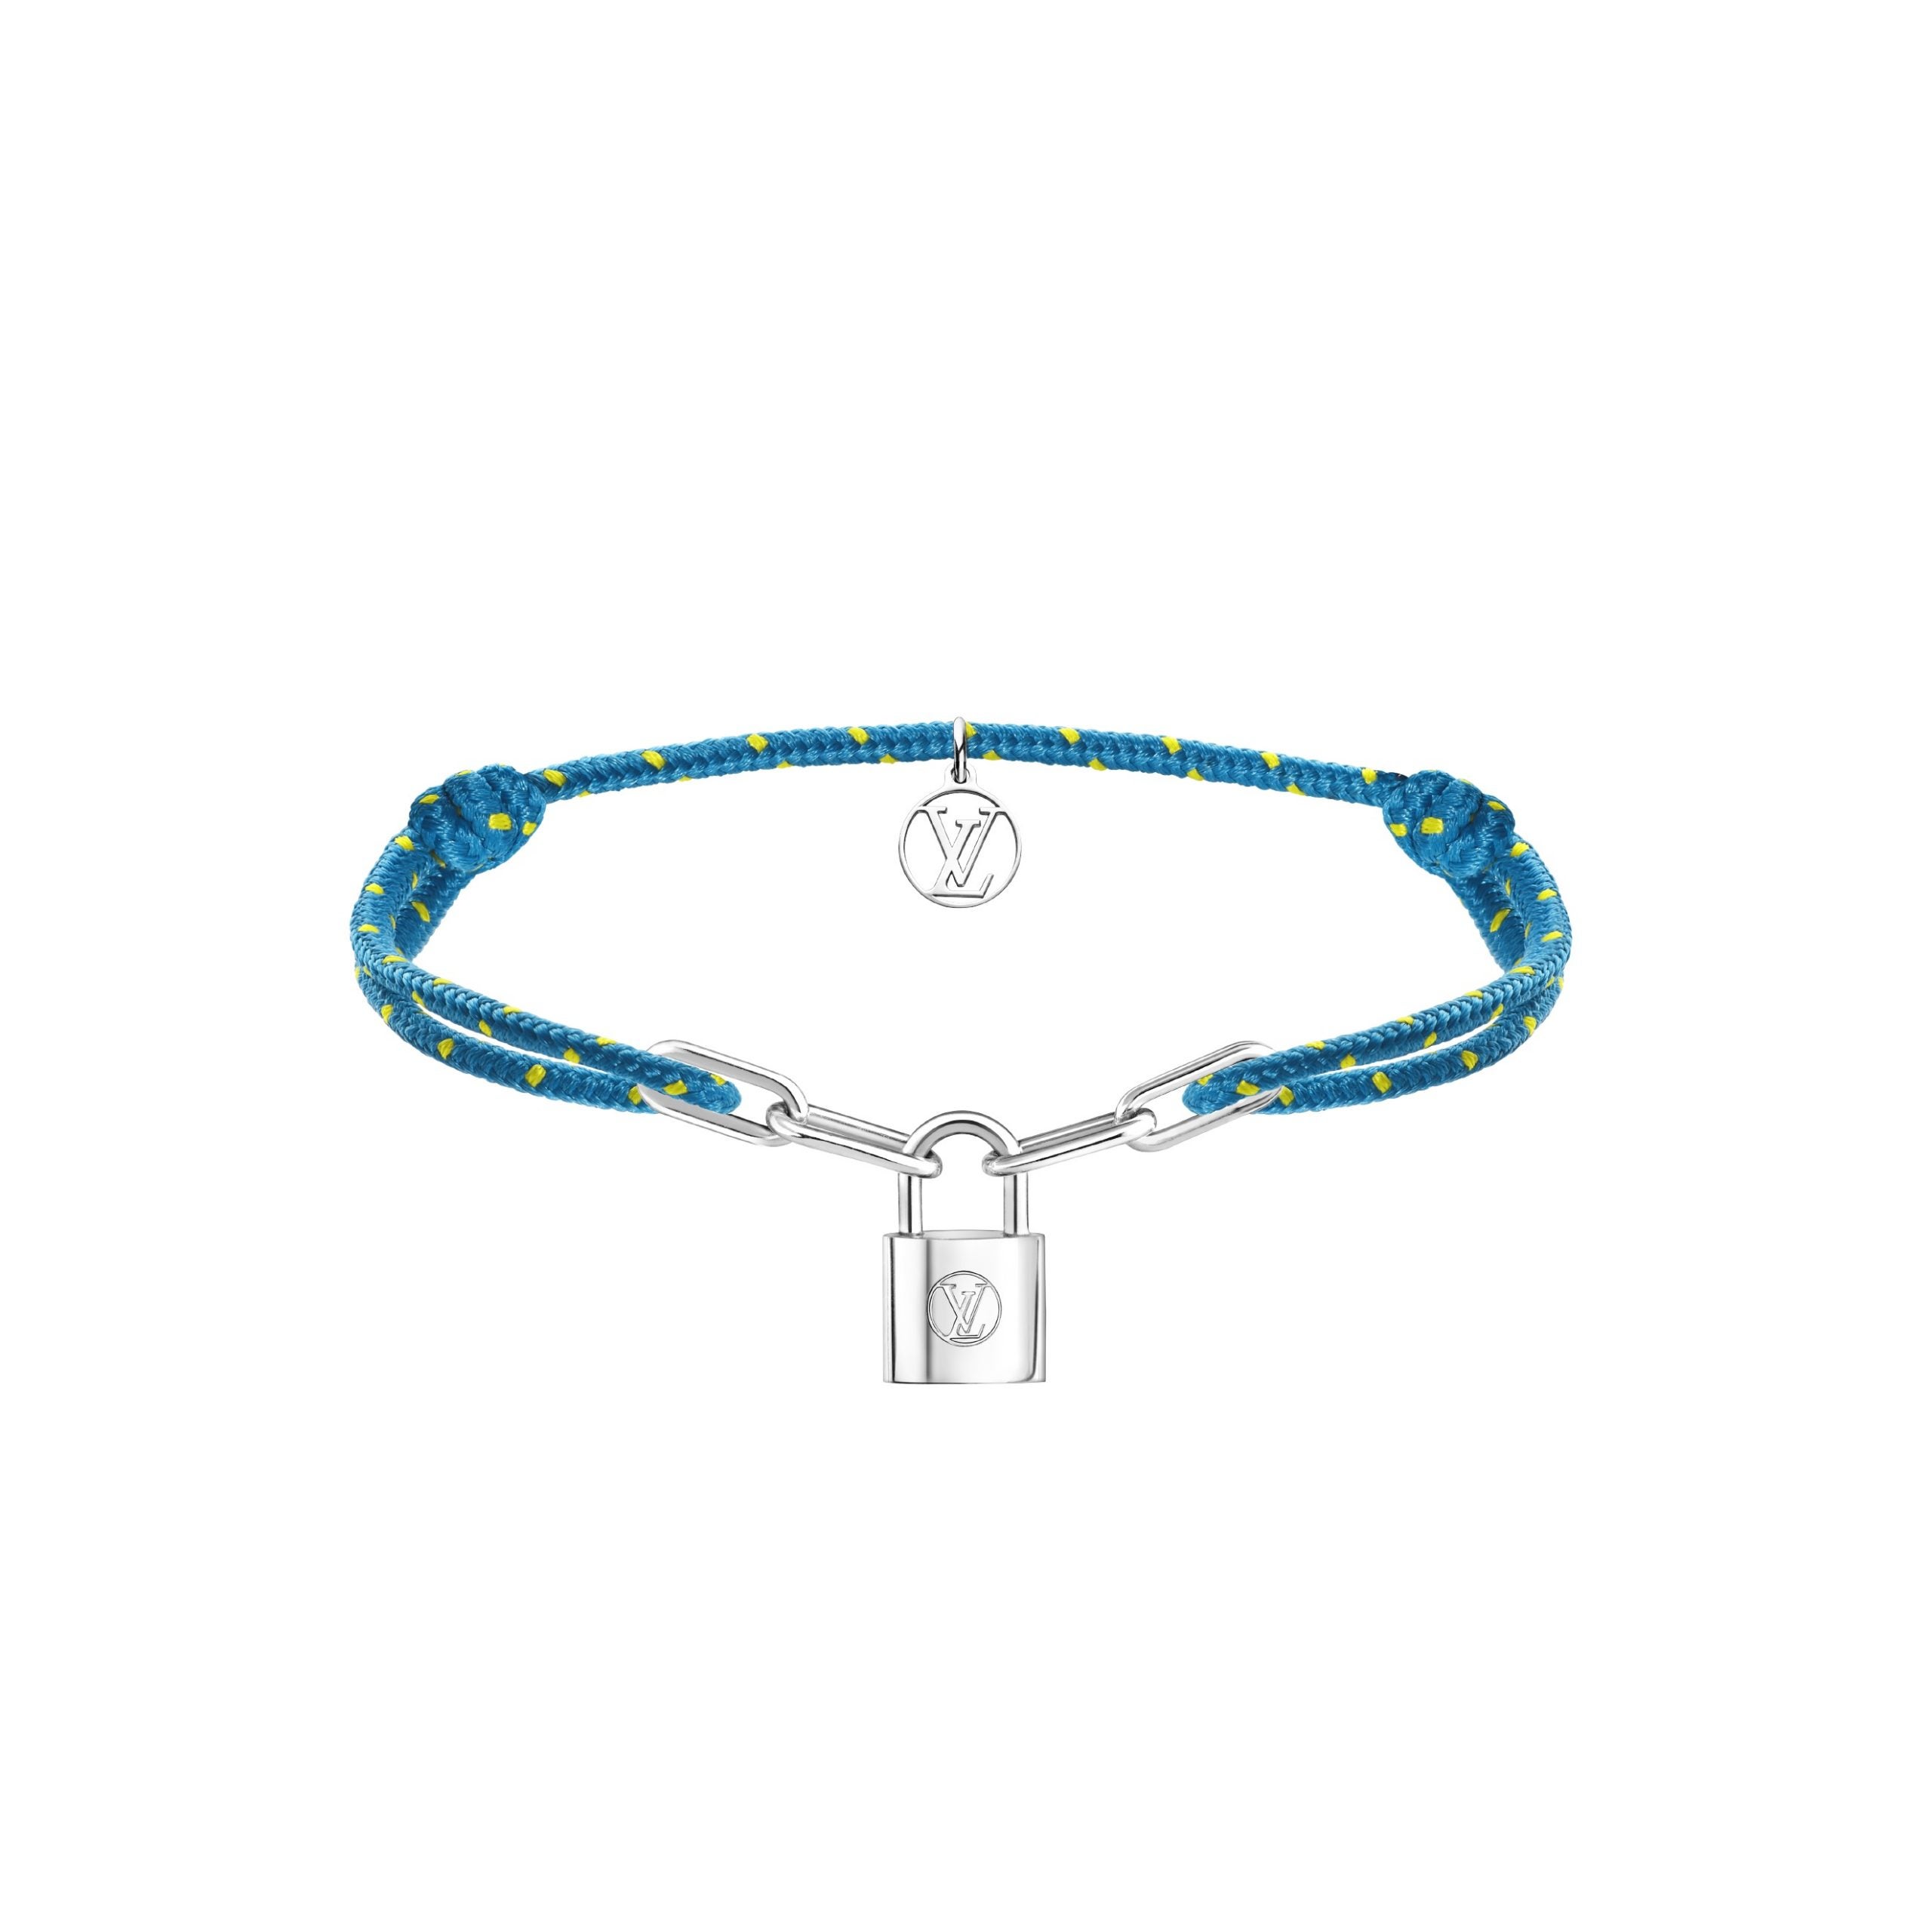 Louis Vuitton launches new Silver Lockit Bracelet designed by Virgil Abloh  in Partnership with UNICEF - The Glass Magazine